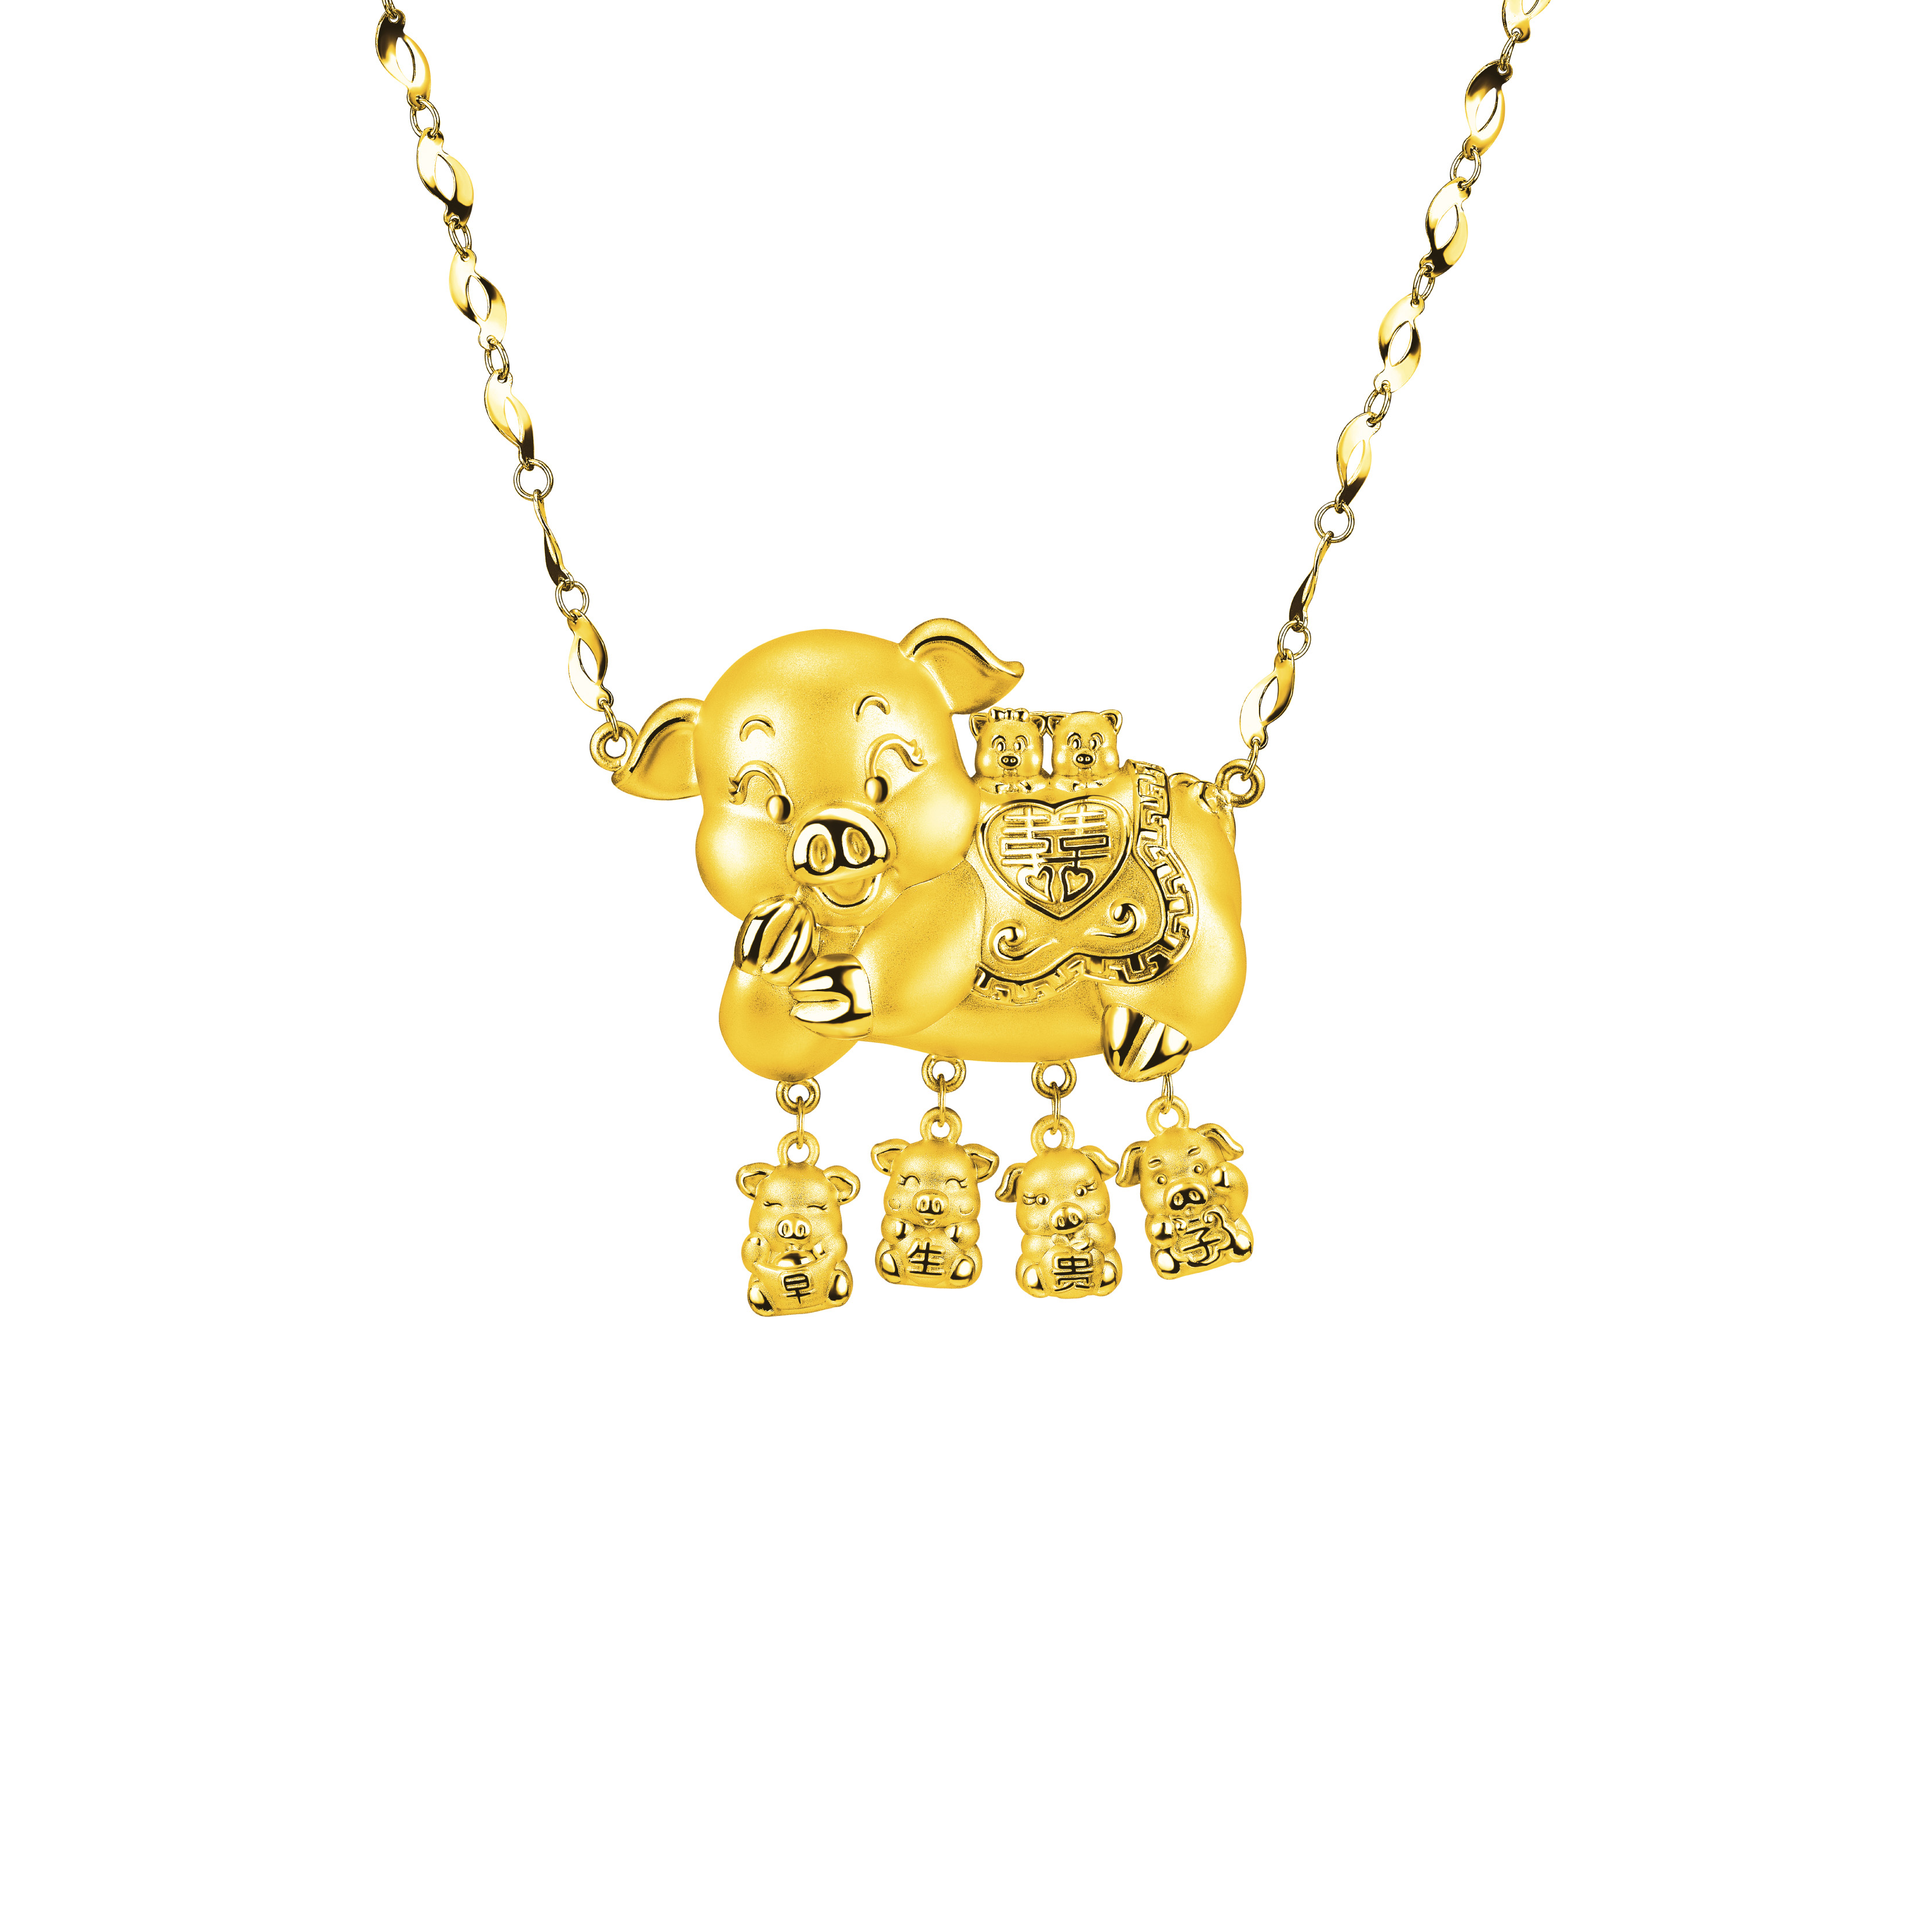 Beloved Collection "Prosperity" Gold Necklace